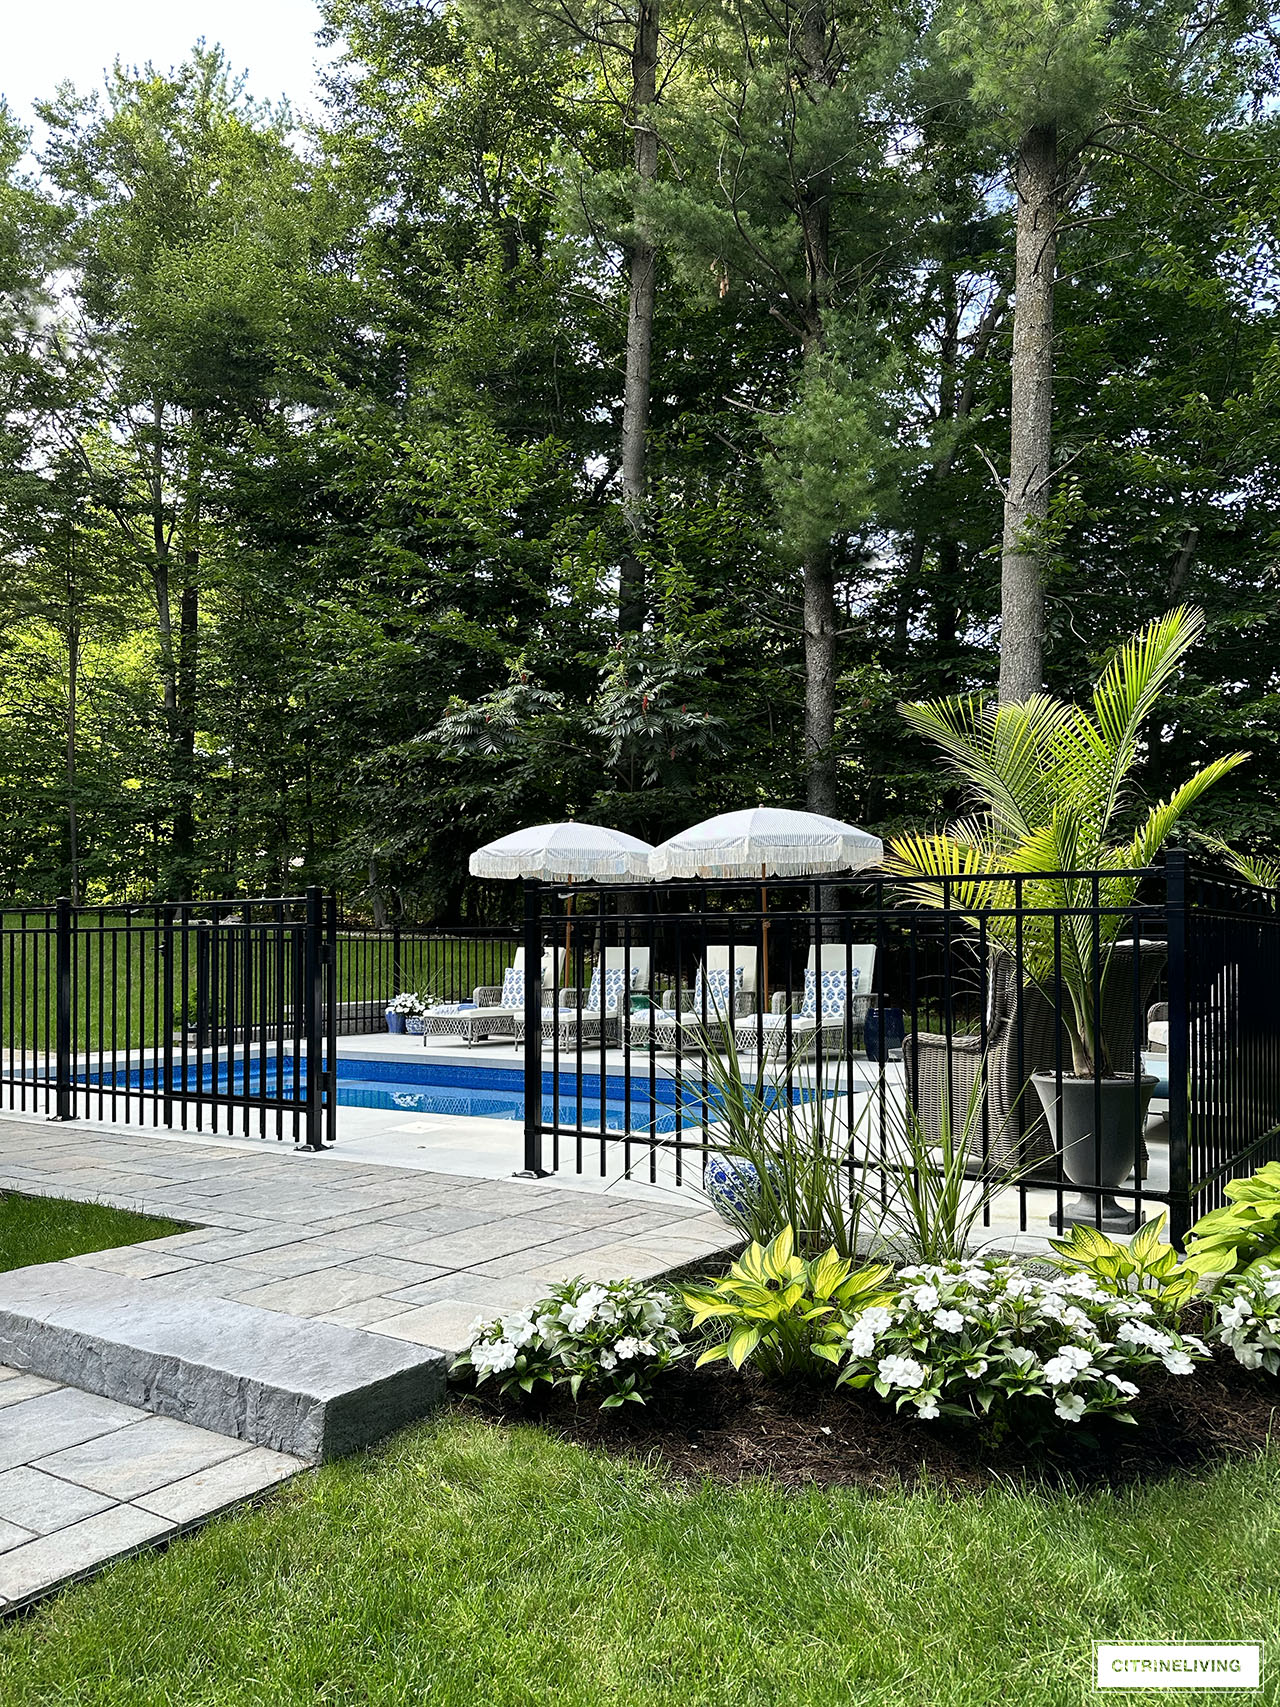 Resort style backyard with in ground pool, loungers, fringe umbrellas. Black iron fence surrounding a cement pool deck.